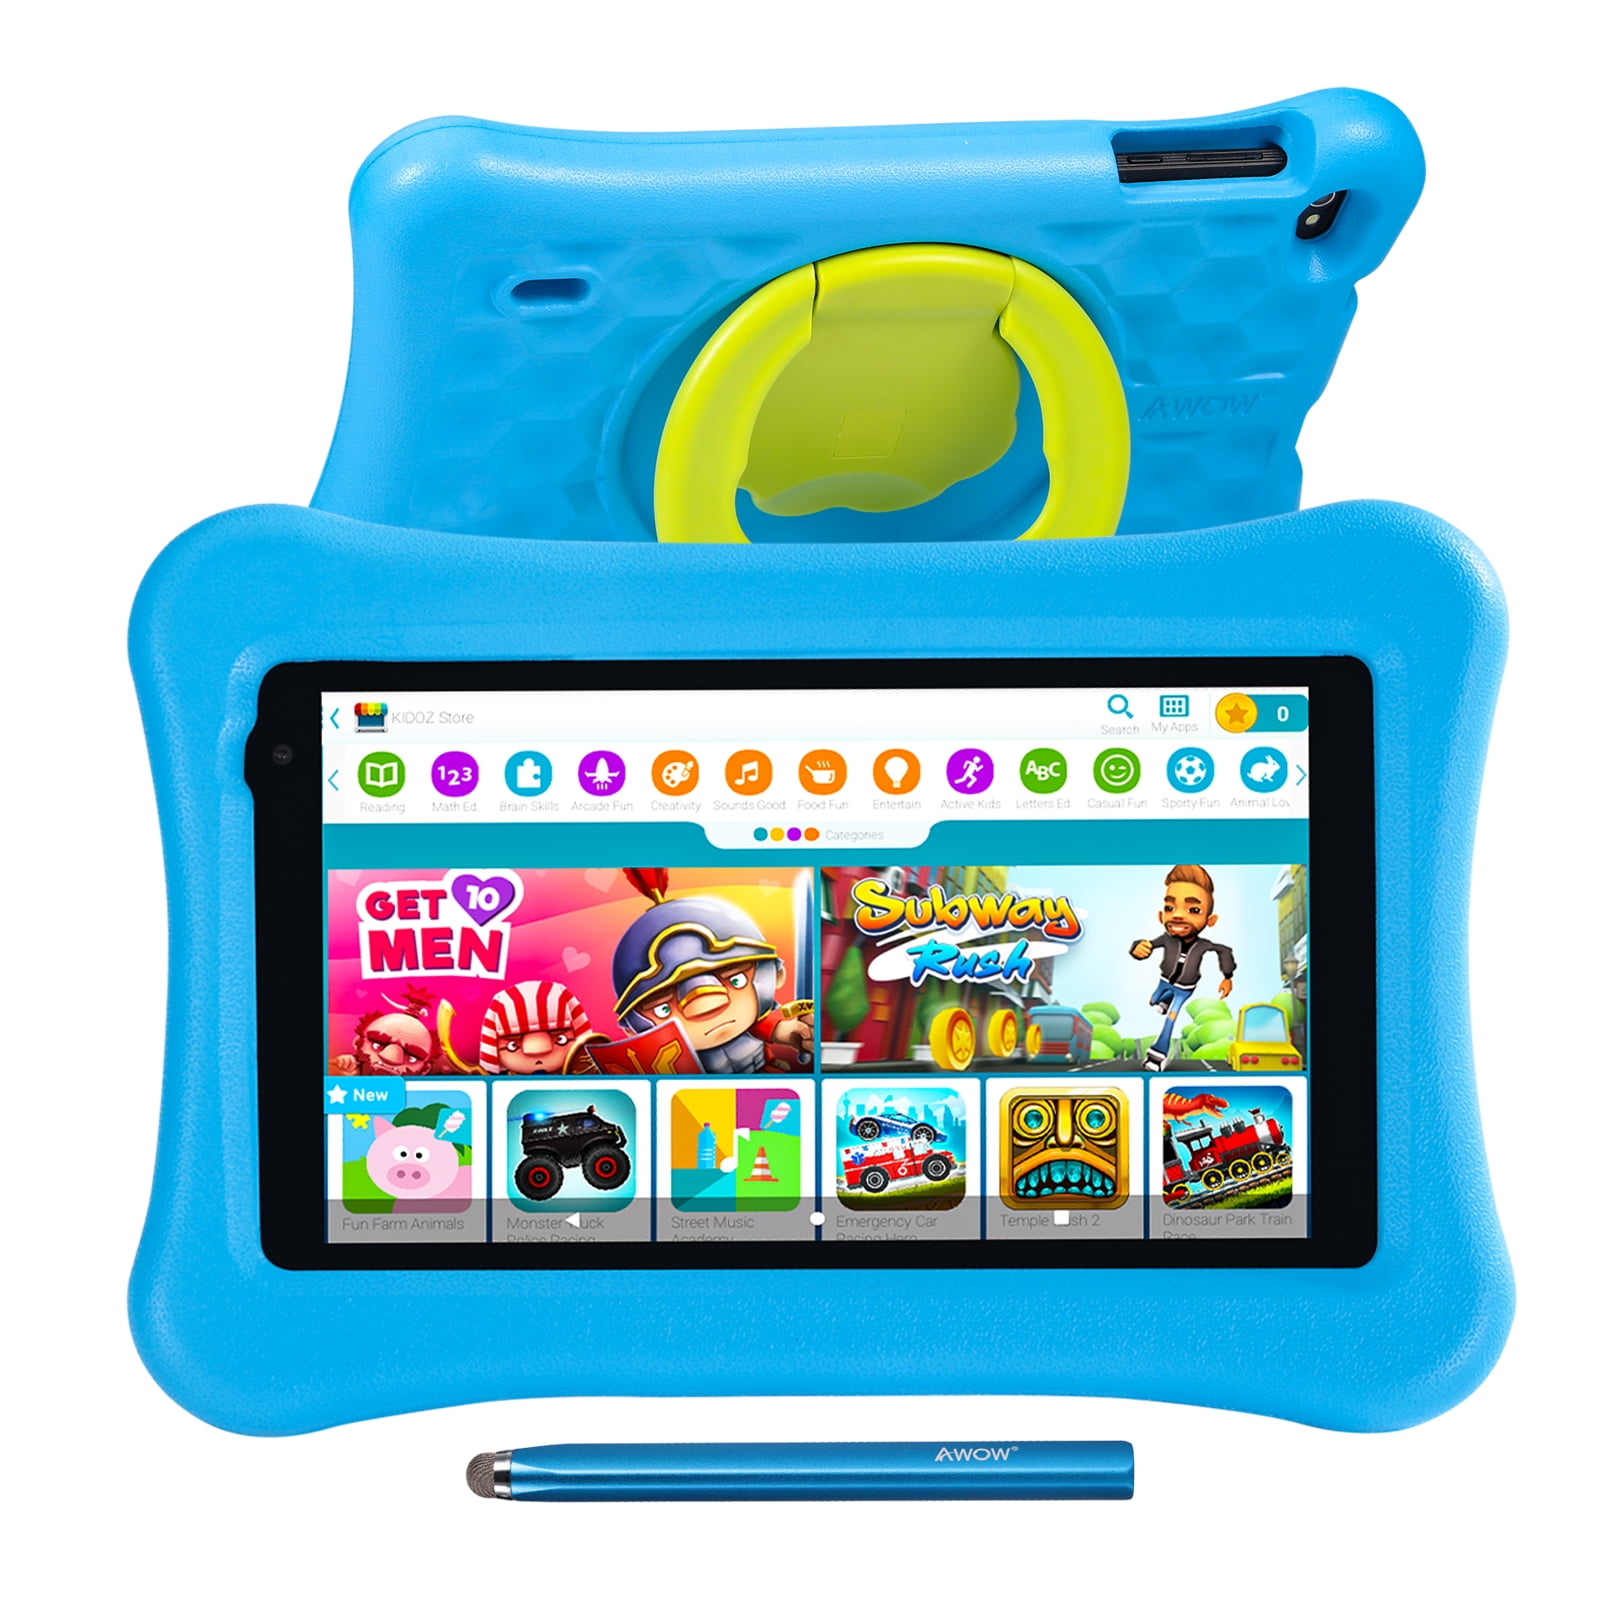 32GB Rom Parental Controls Dual Cameras Blue 10.1 inch Kids Tablet AWOW Tablet PC for Kids Android 10 Go Quad Core Kids-Proof case and Stylus Pen KIDOZ Pre-Installed